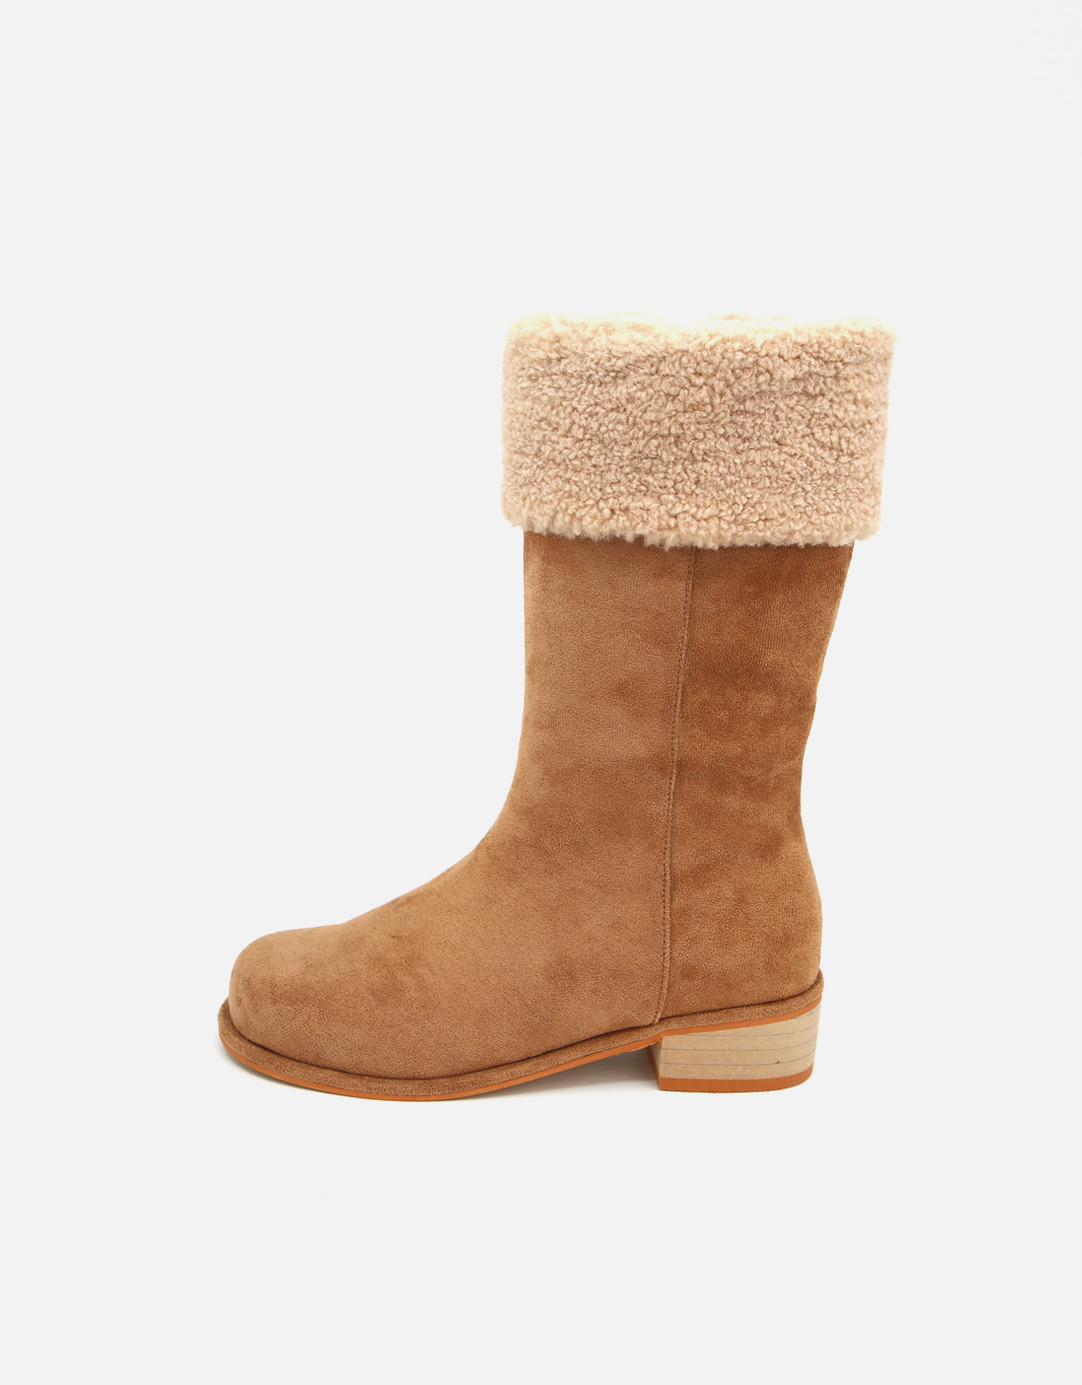 SUEDE DAILY MIDDLE BOOTS